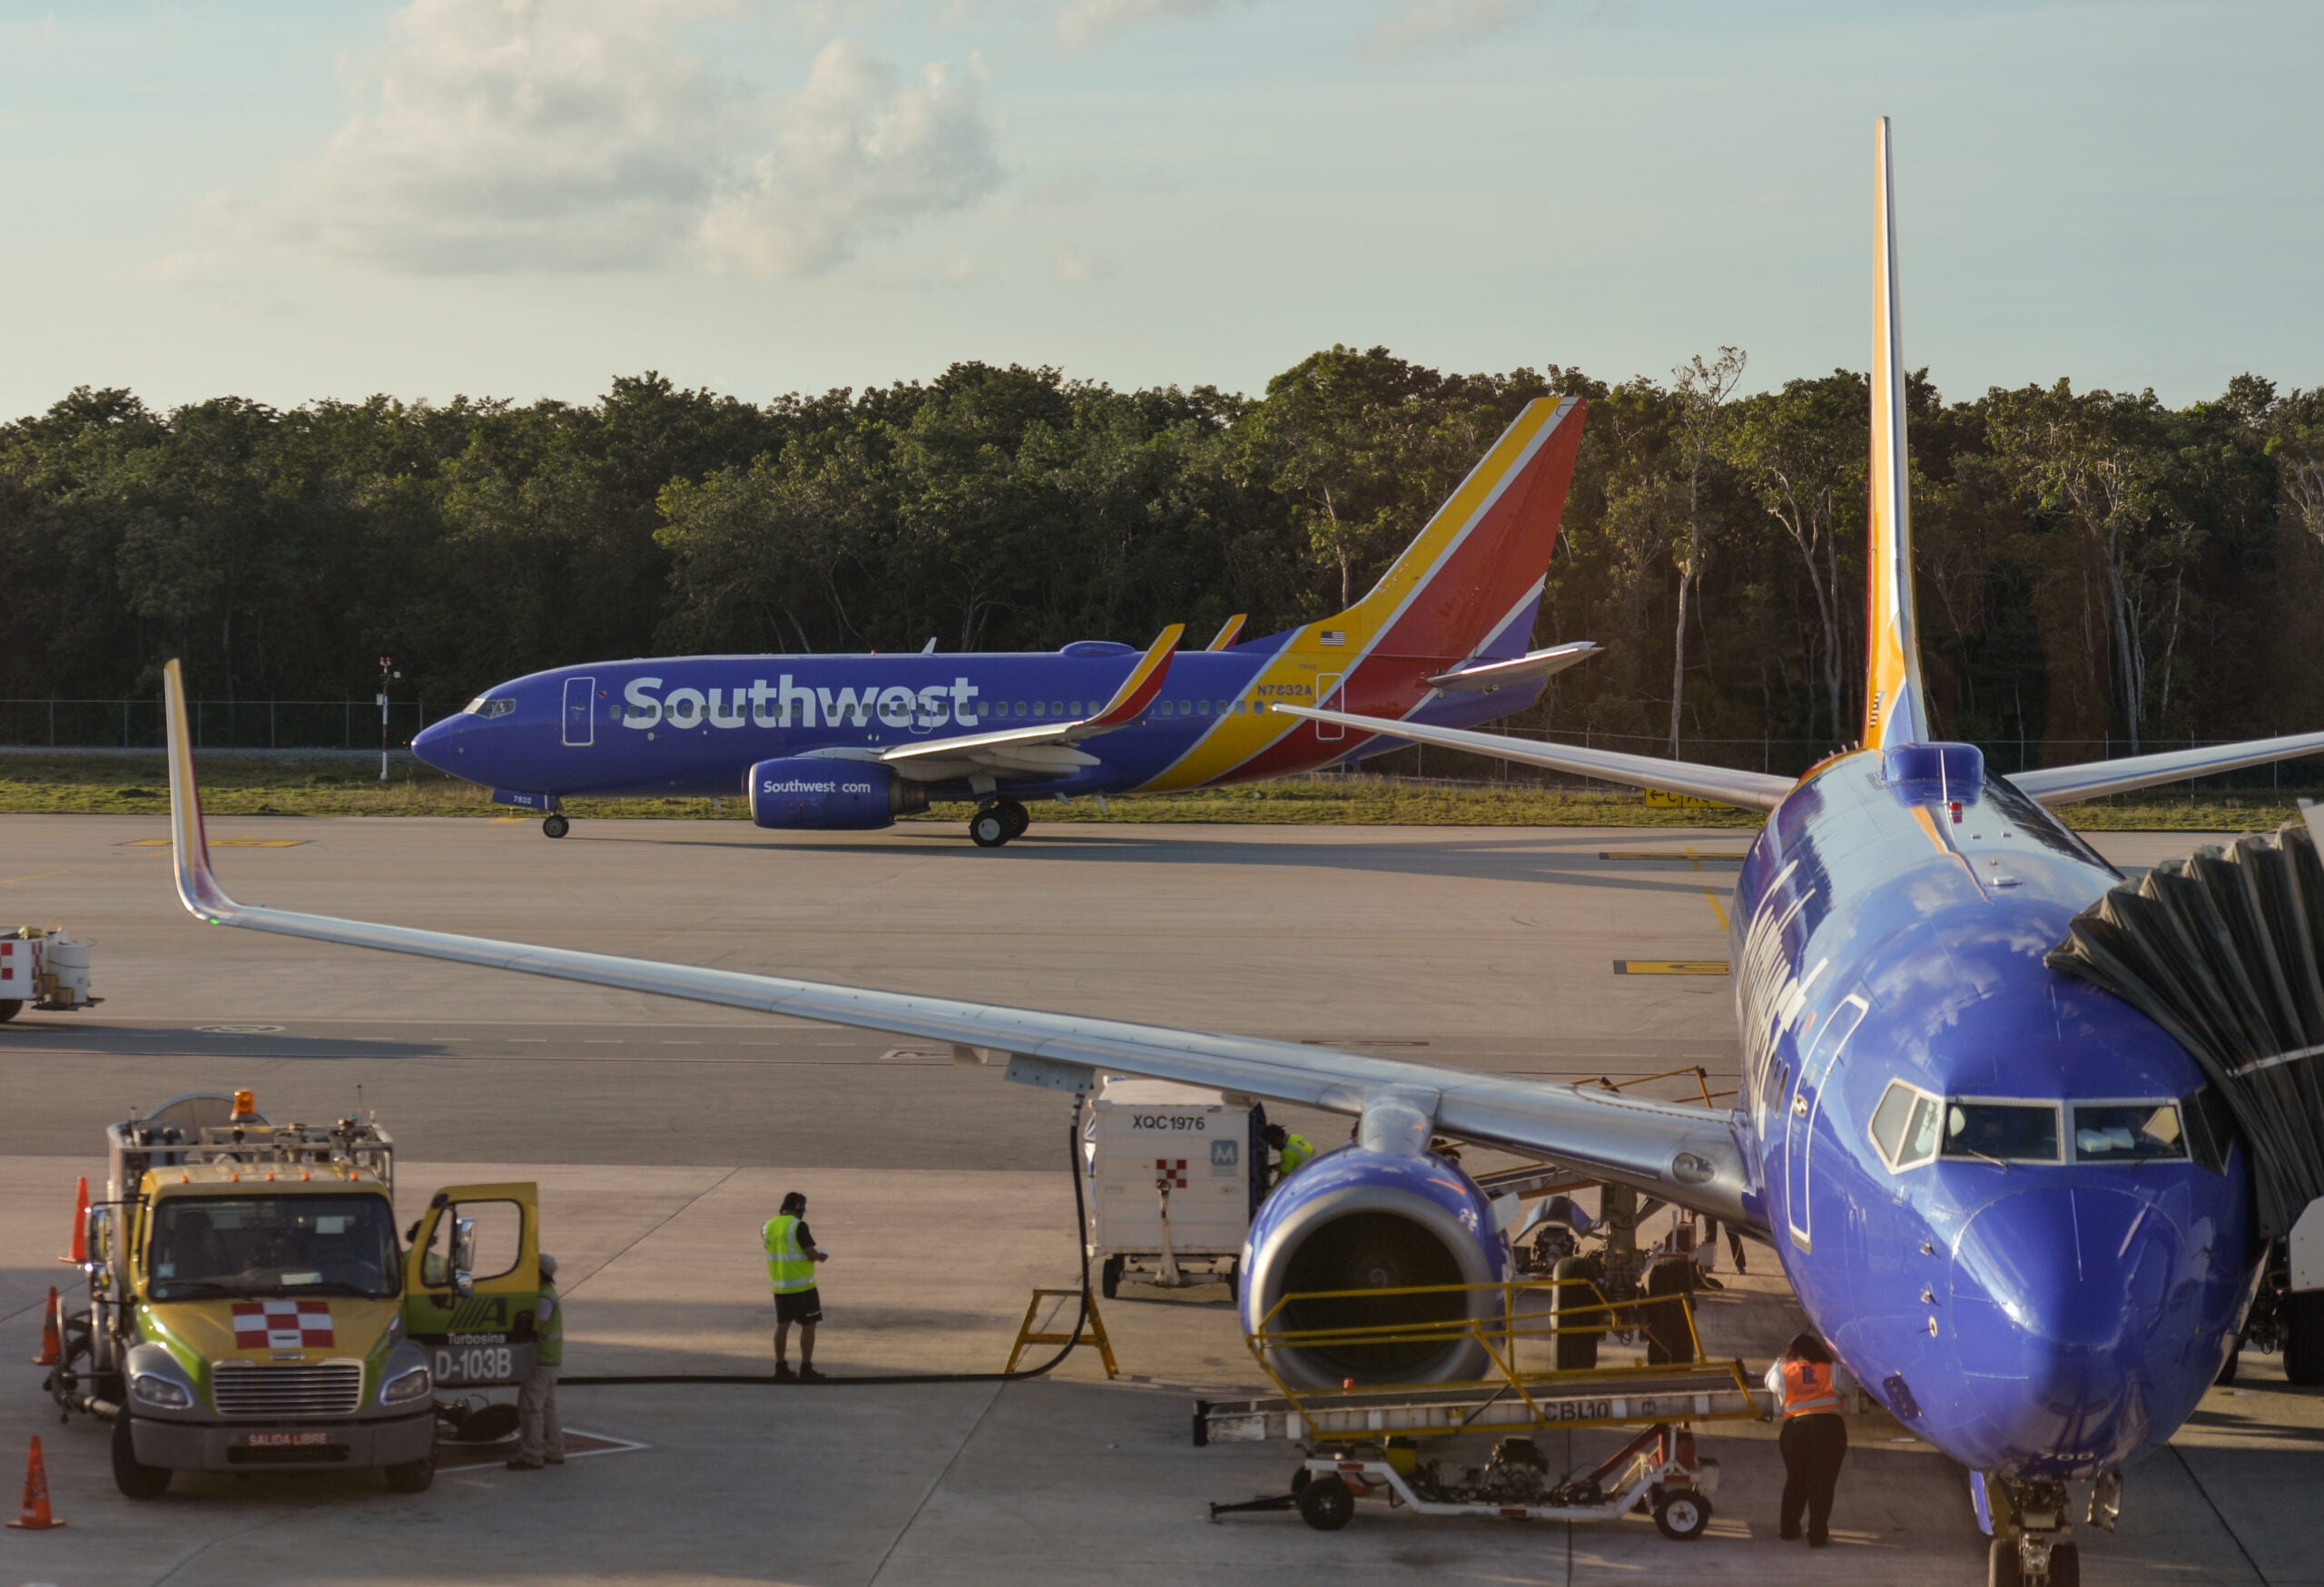 Southwest planes at Cancun airport